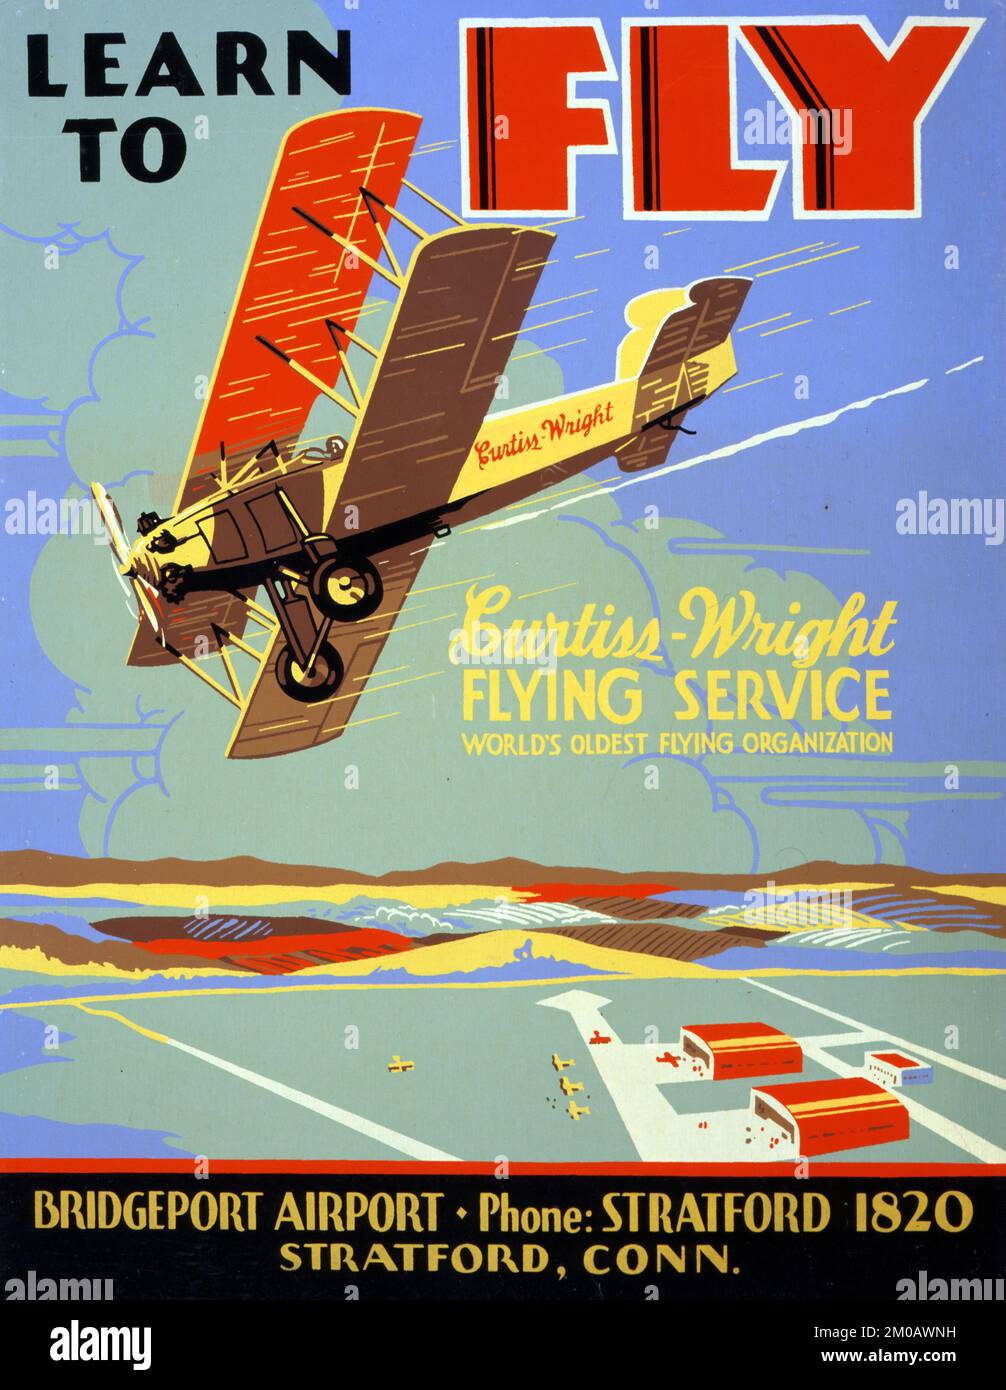 Learn to fly Curtiss-Wright Flying Service, world’s oldest flying organization. Bridgeport Airport (1930) Stock Photo